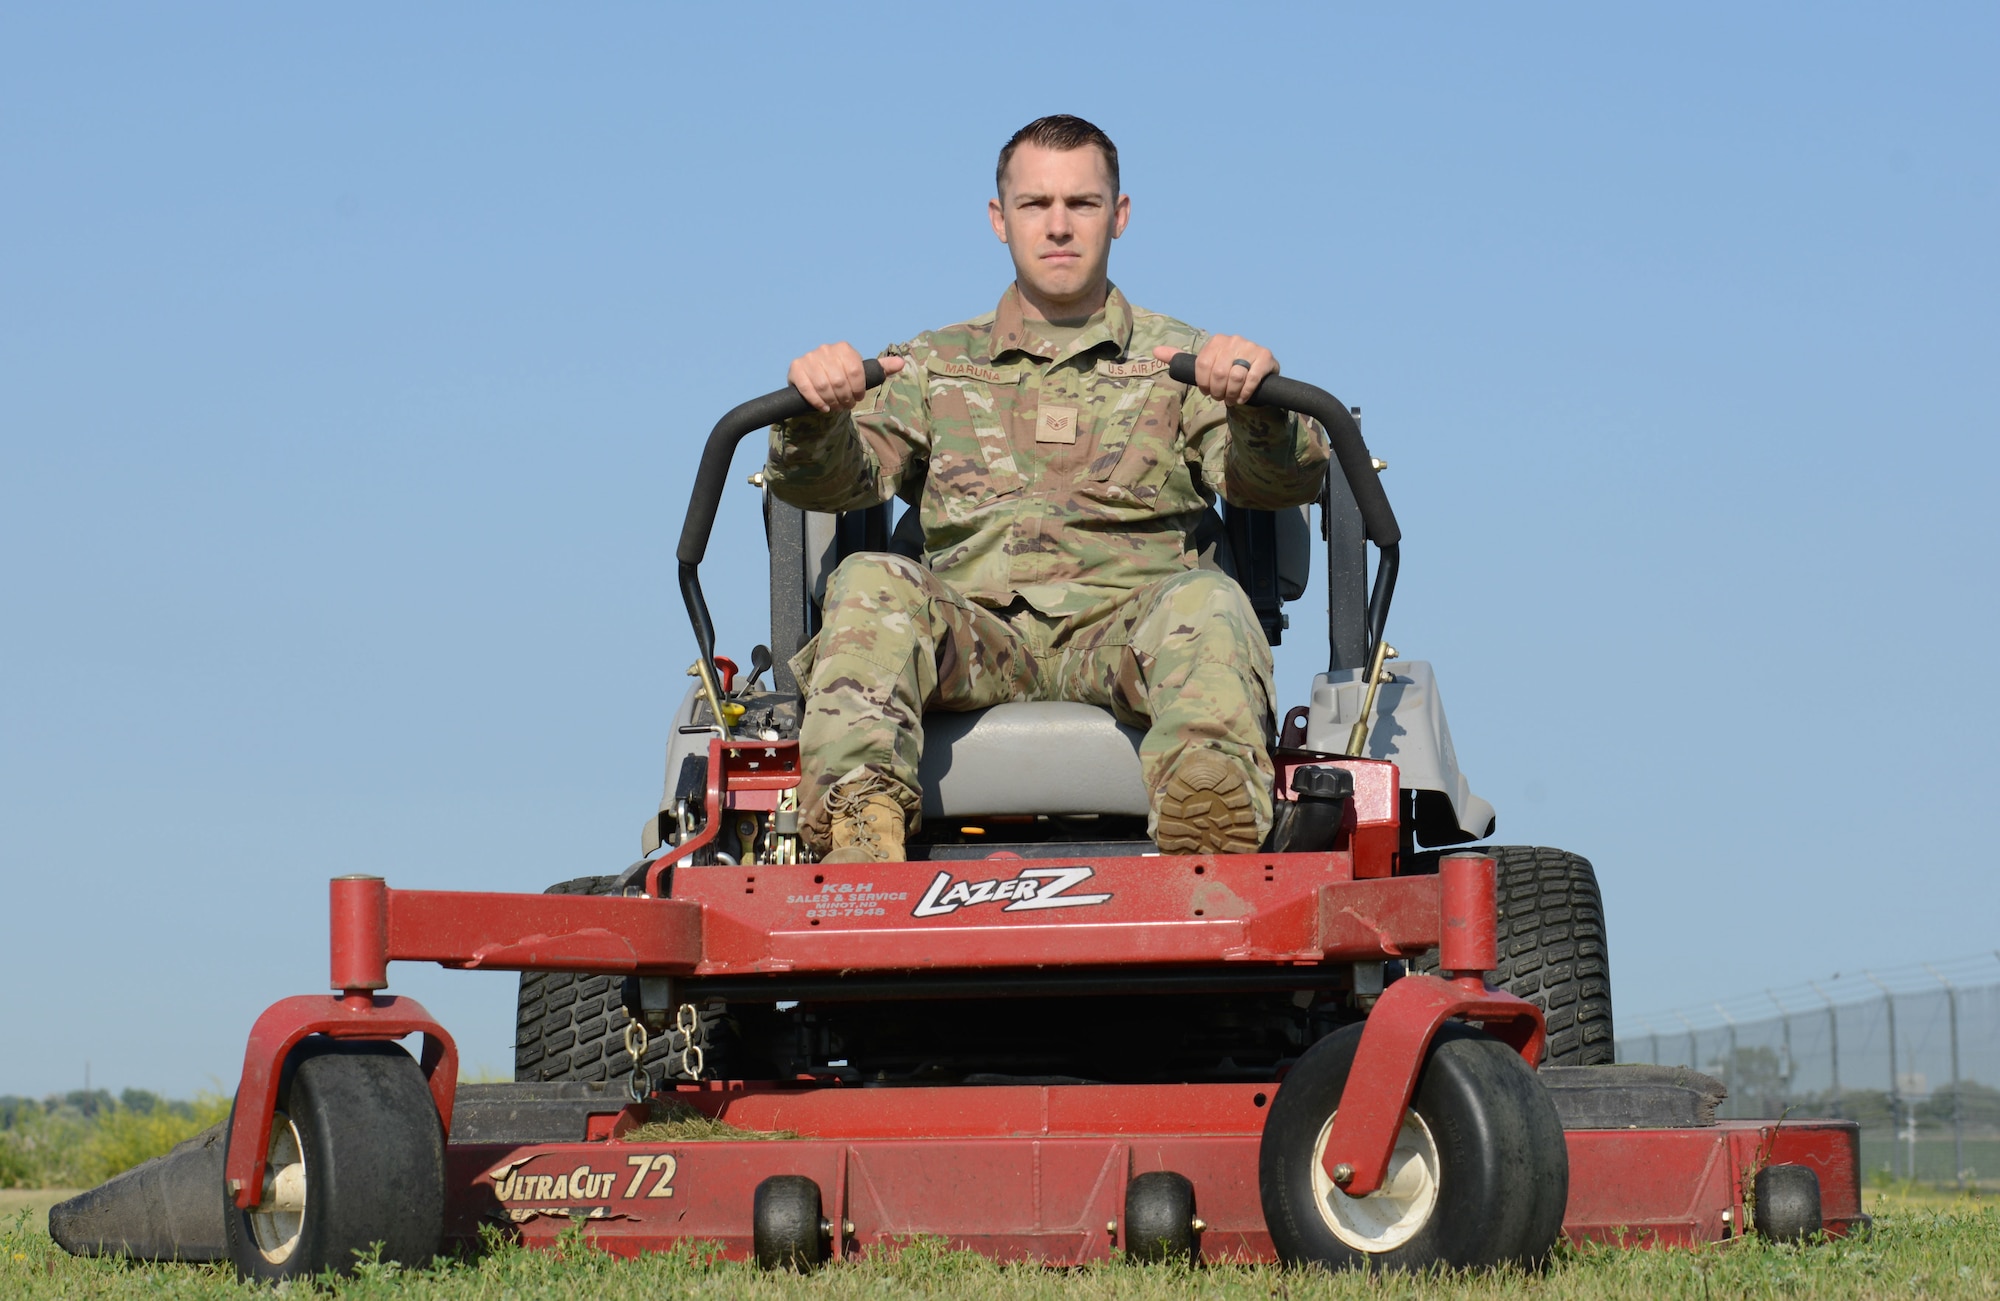 U.S. Air Force Staff Sgt. Edward Maruna, 742nd Missile Squadron facility manager, finishes up his daily duty of mowing the grass around a missile site at Minot Air Force Base, North Dakota, July 7, 2023. Maruna makes sure the grass is cut to prevent any obstructions, like wildlife, from getting in the alert response team’s way of safeguarding the site. (U.S. Air Force photo by Airman 1st Class Trust Tate)